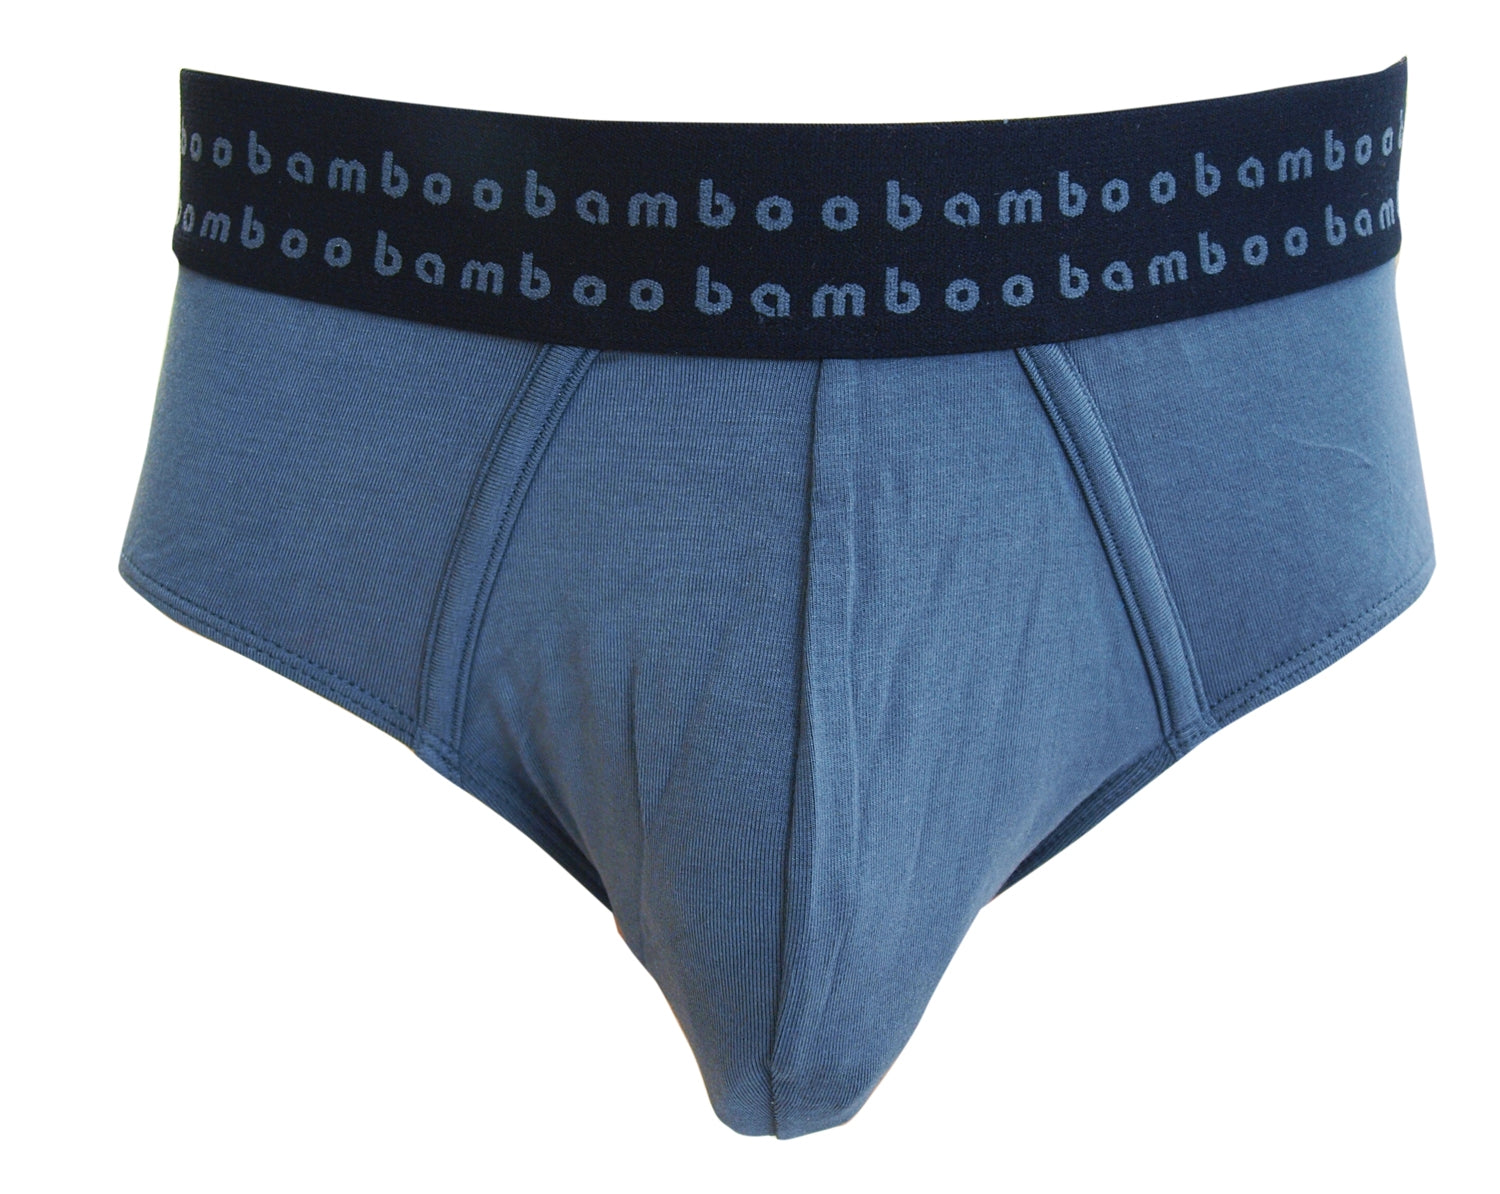 Mens Bamboo Trunks M Slate Mens Underwear by Bamboo Textiles | The Bloke Shop